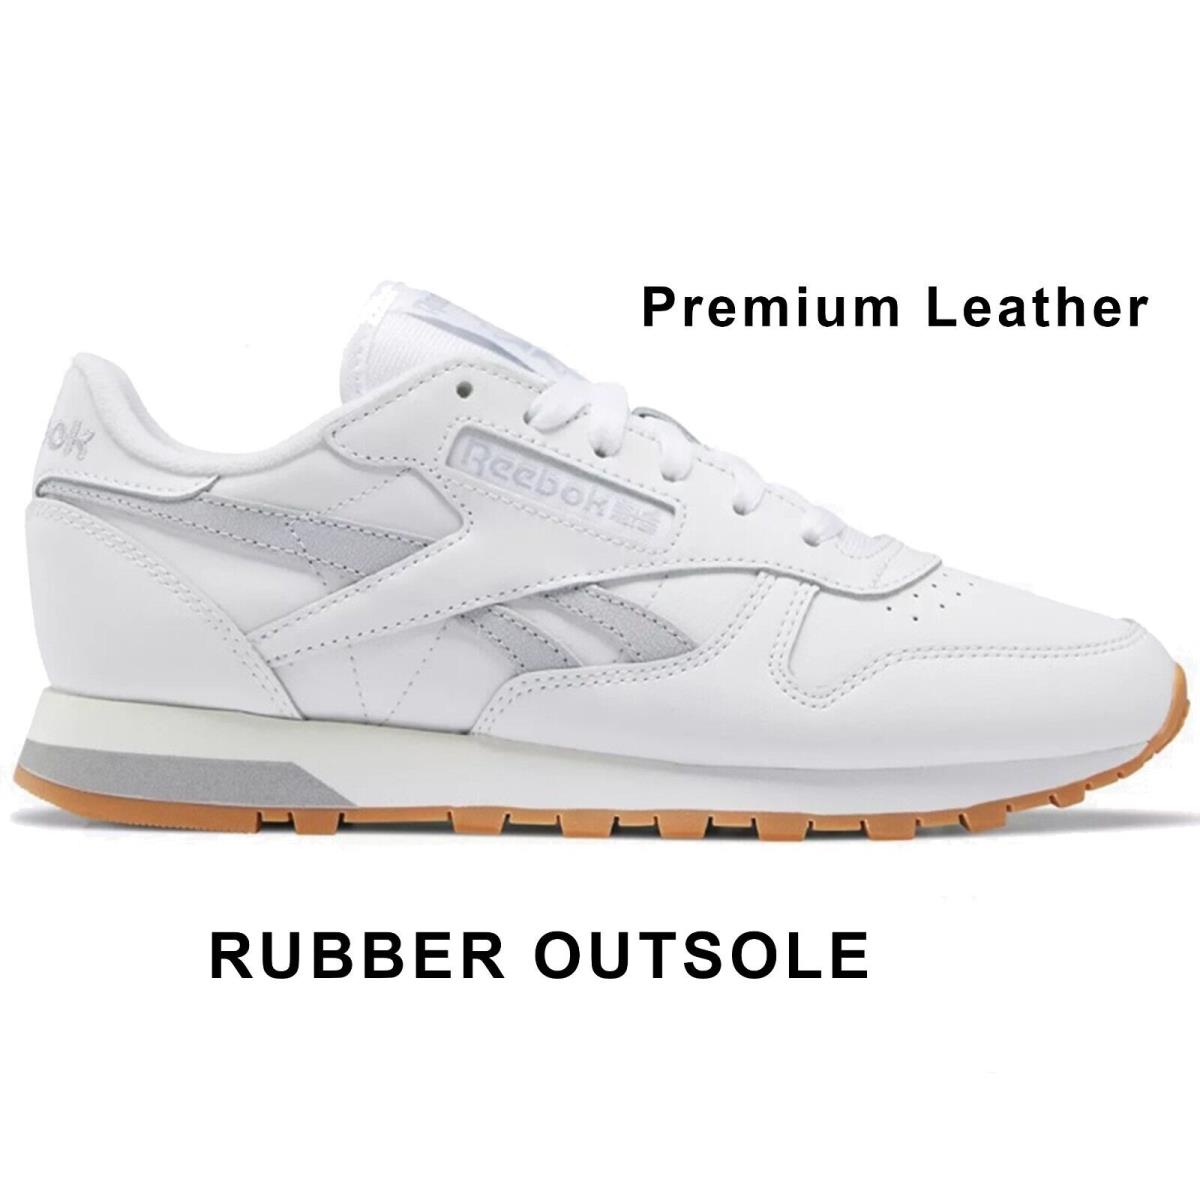 Reebok Women`s Classic Premium Leather Walking Training Shoes Breathable Lining